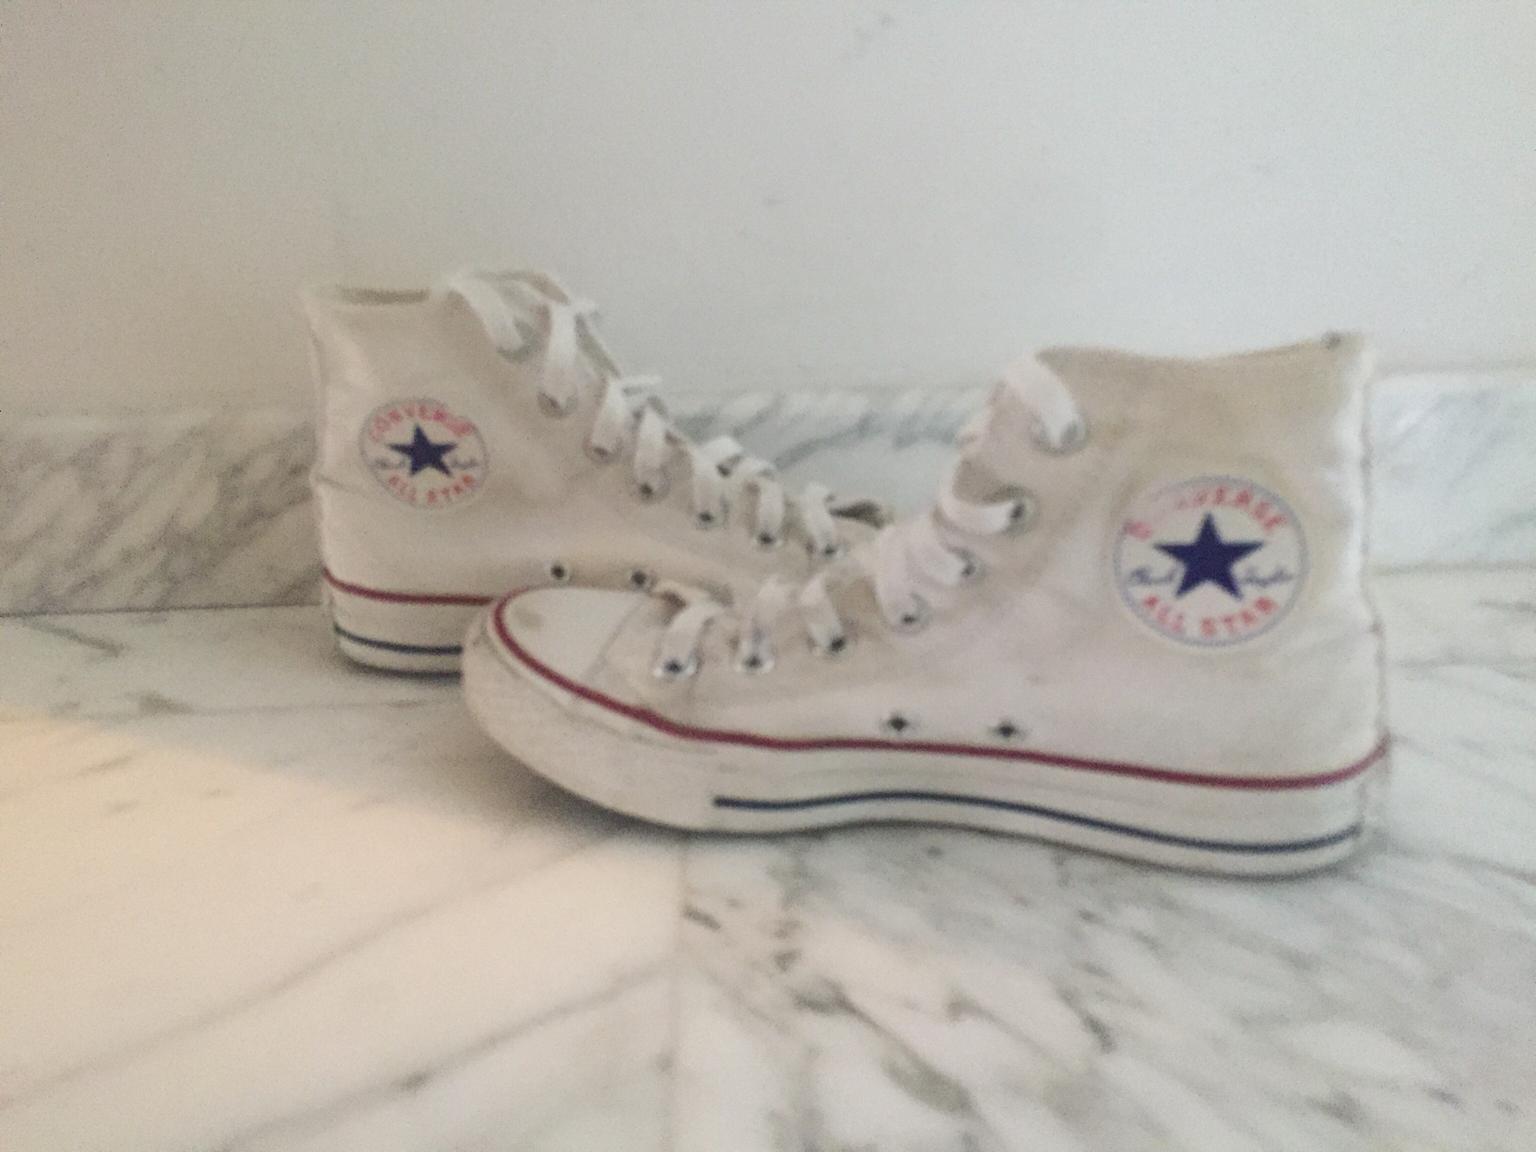 Converse in 86039 Termoli for €20.00 for sale | Shpock